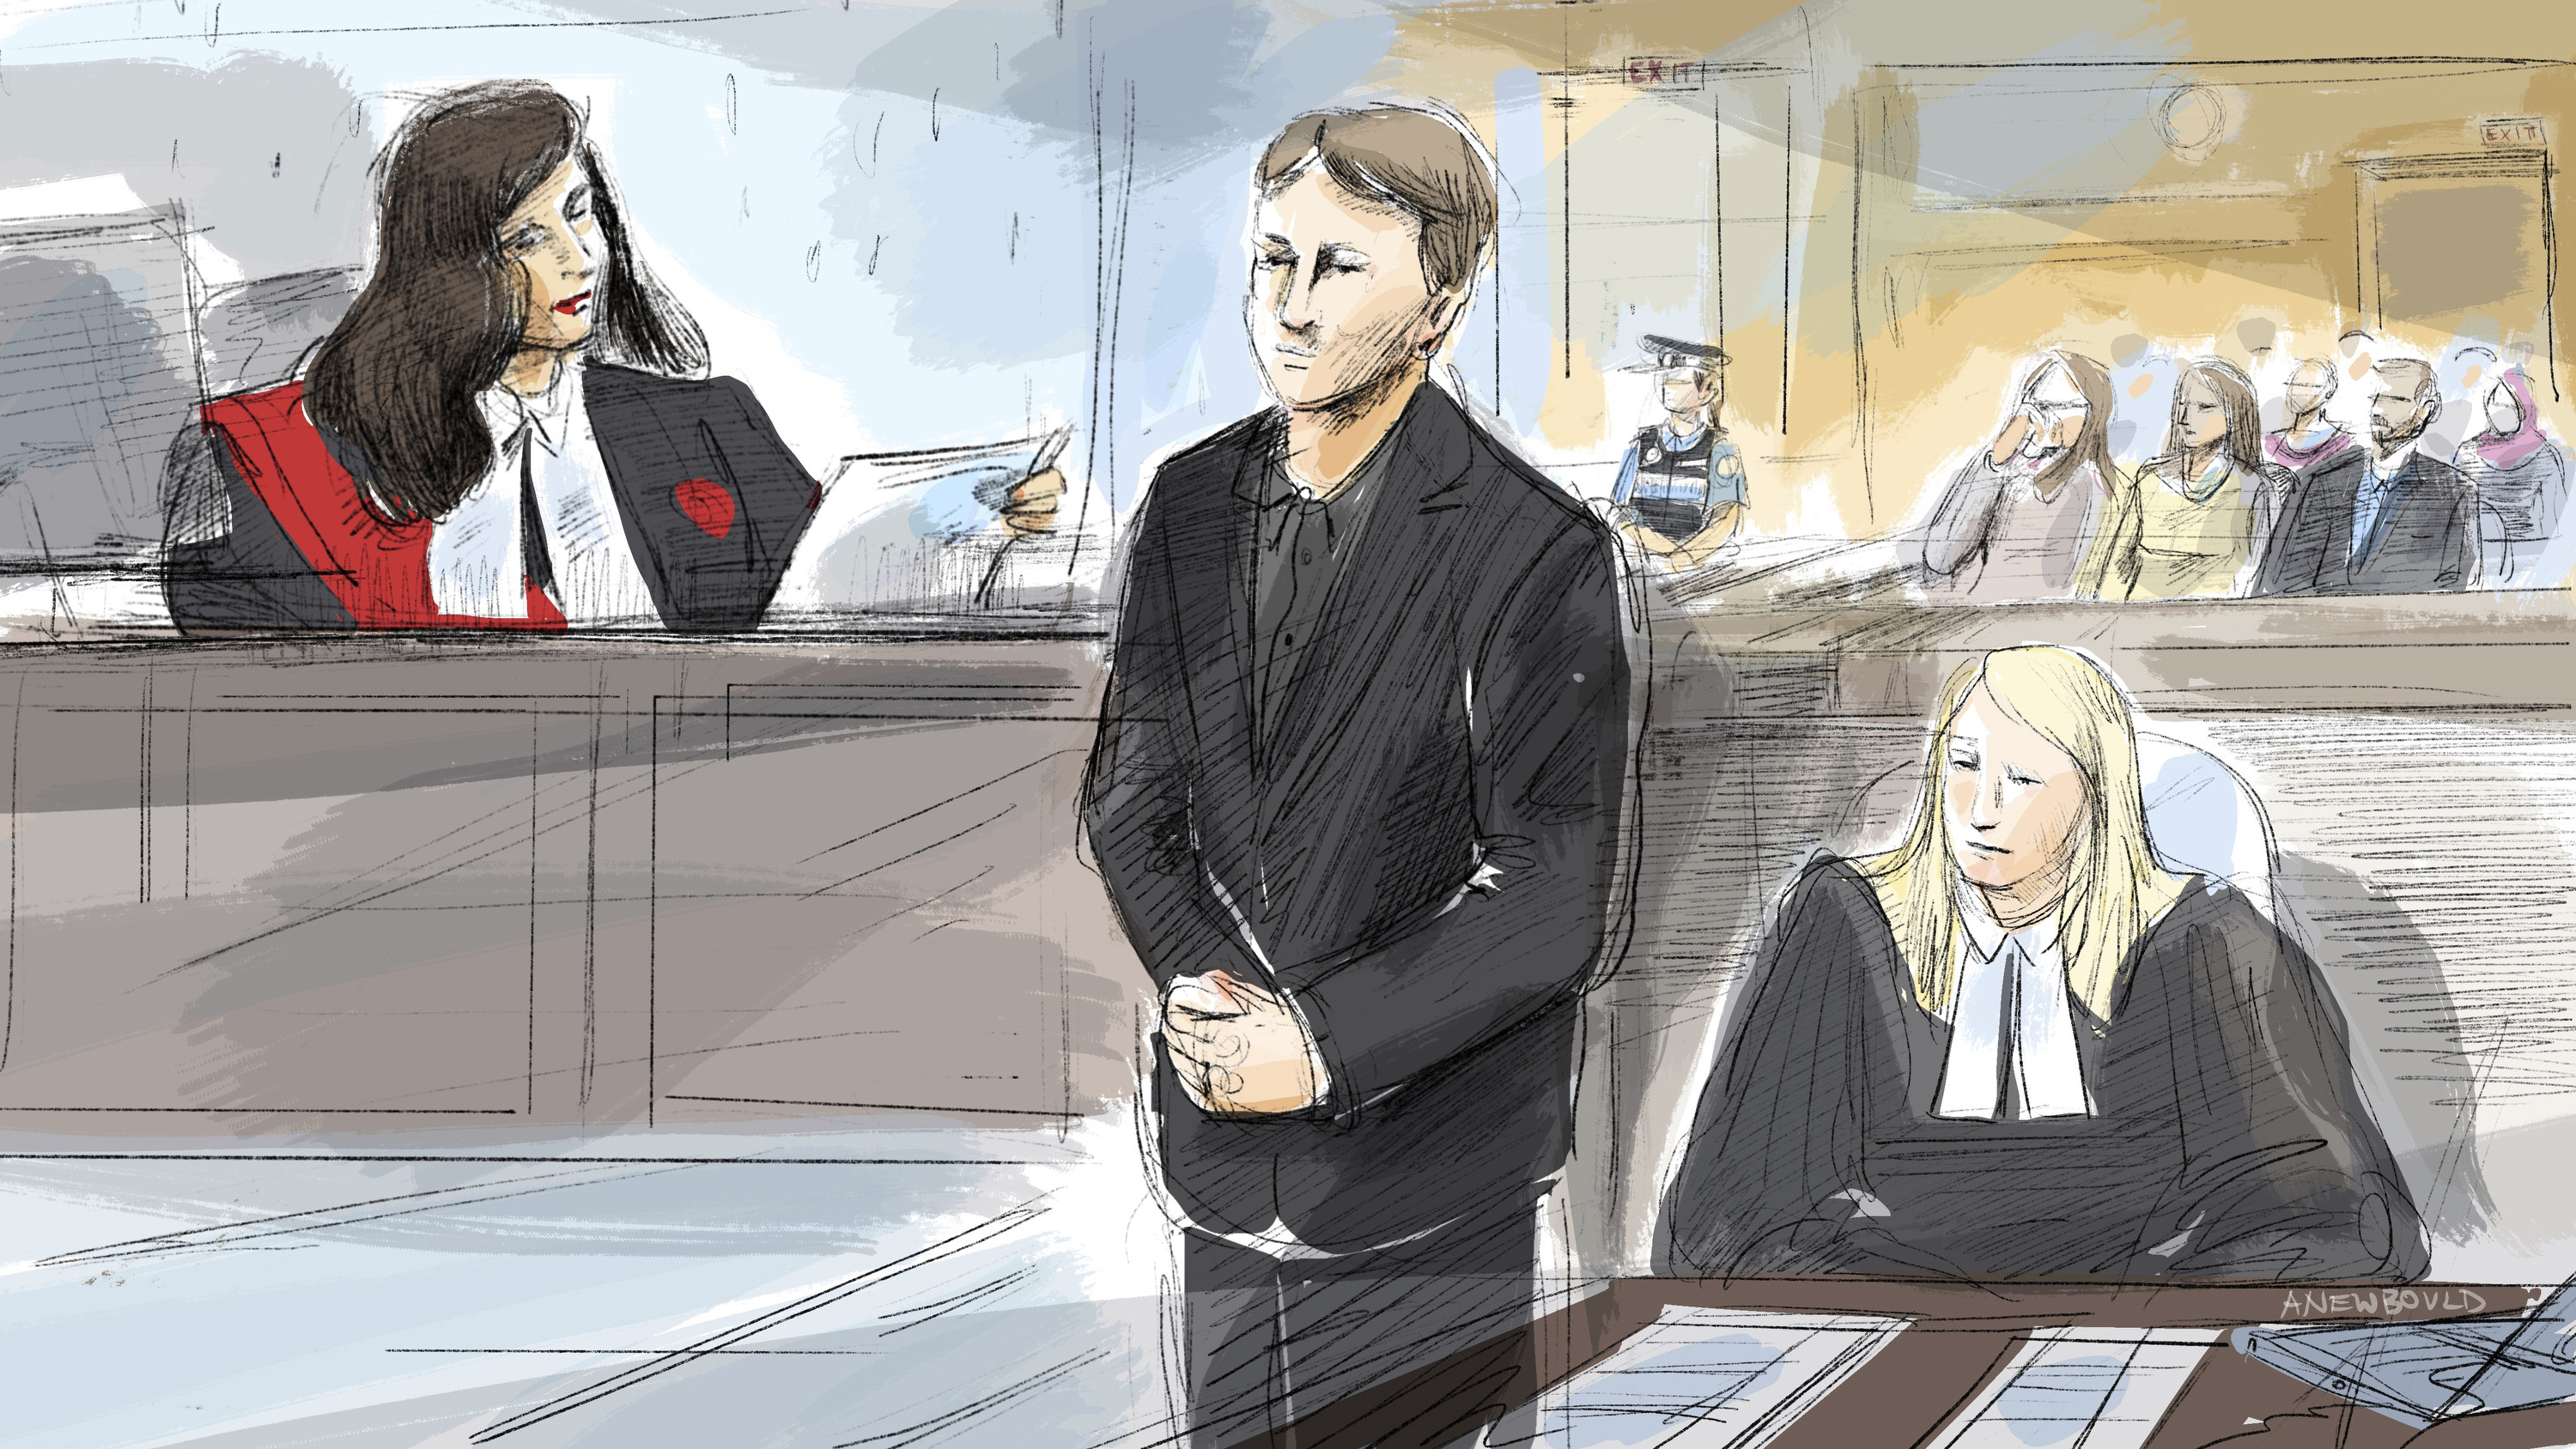 Nathaniel Veltman (centre) was found guilty of four counts of first-degree murder and one count of attempted murder in Windsor, Ontario, on Thursday. Courtroom sketch: Alexandra Newbould/Canadian Press via AP